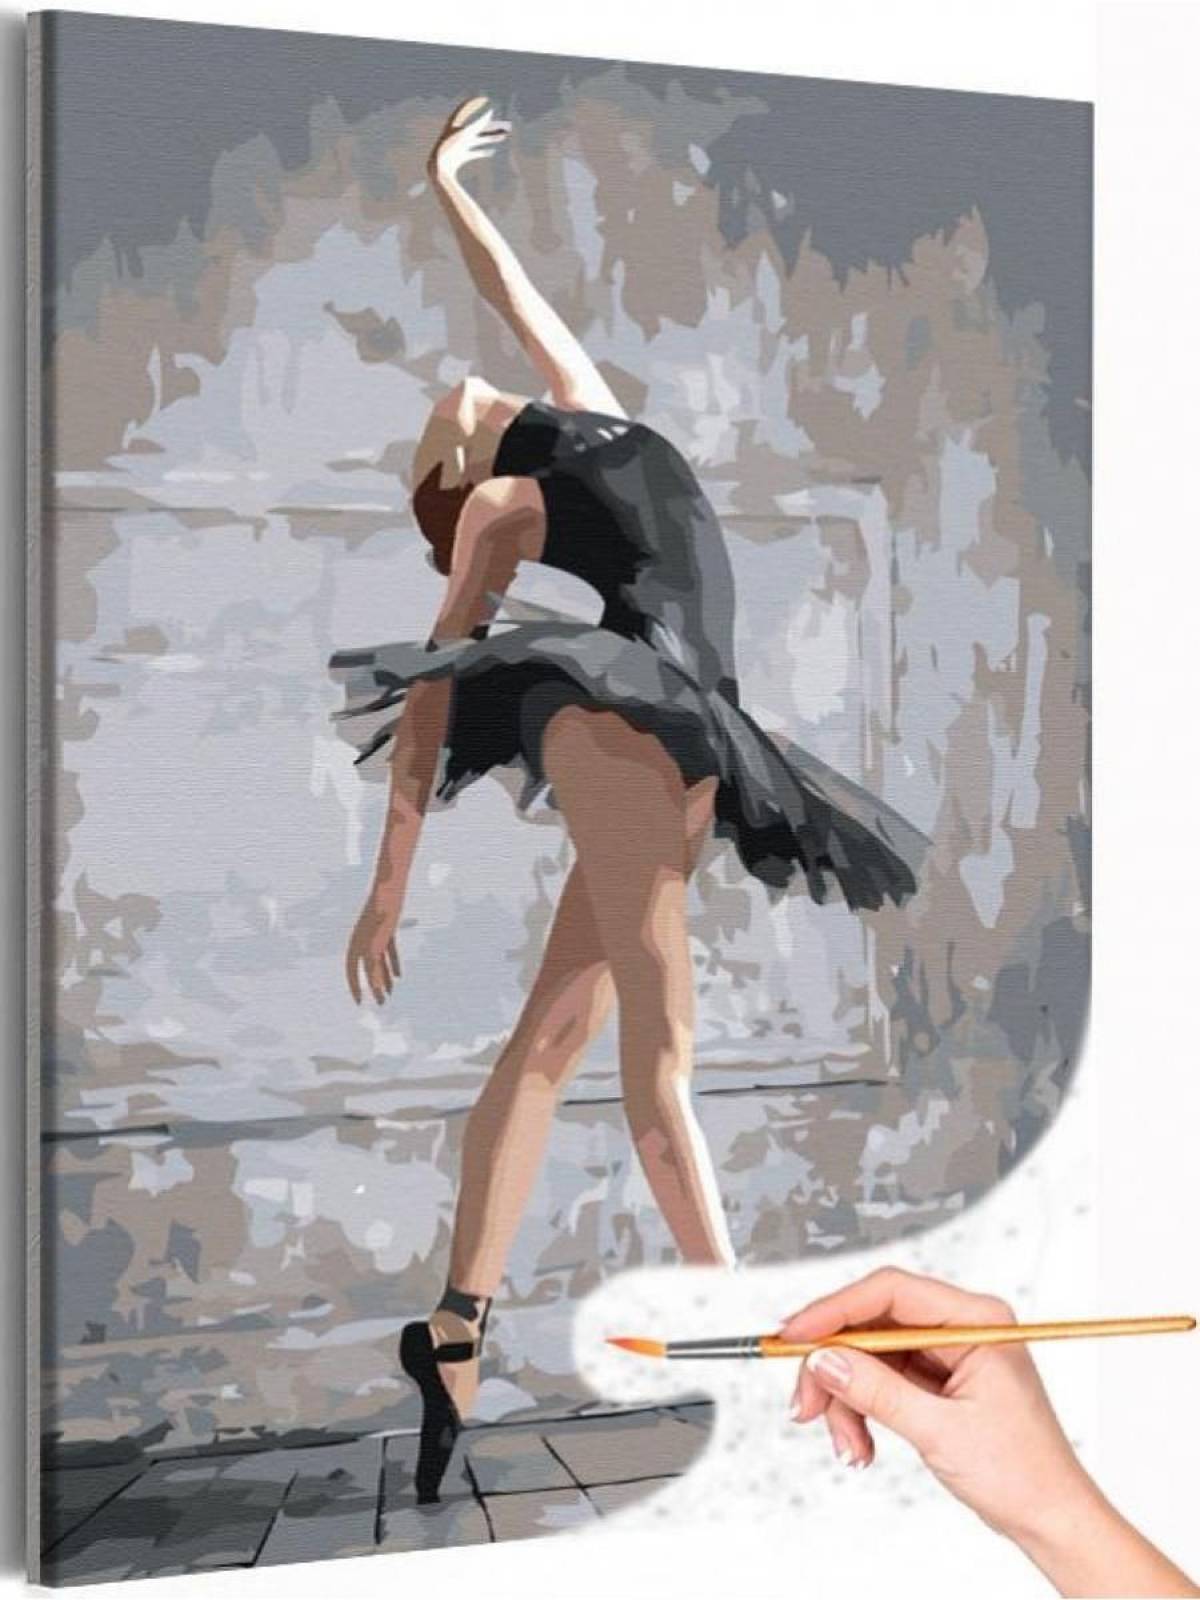 Ethereal ballerina coloring by numbers